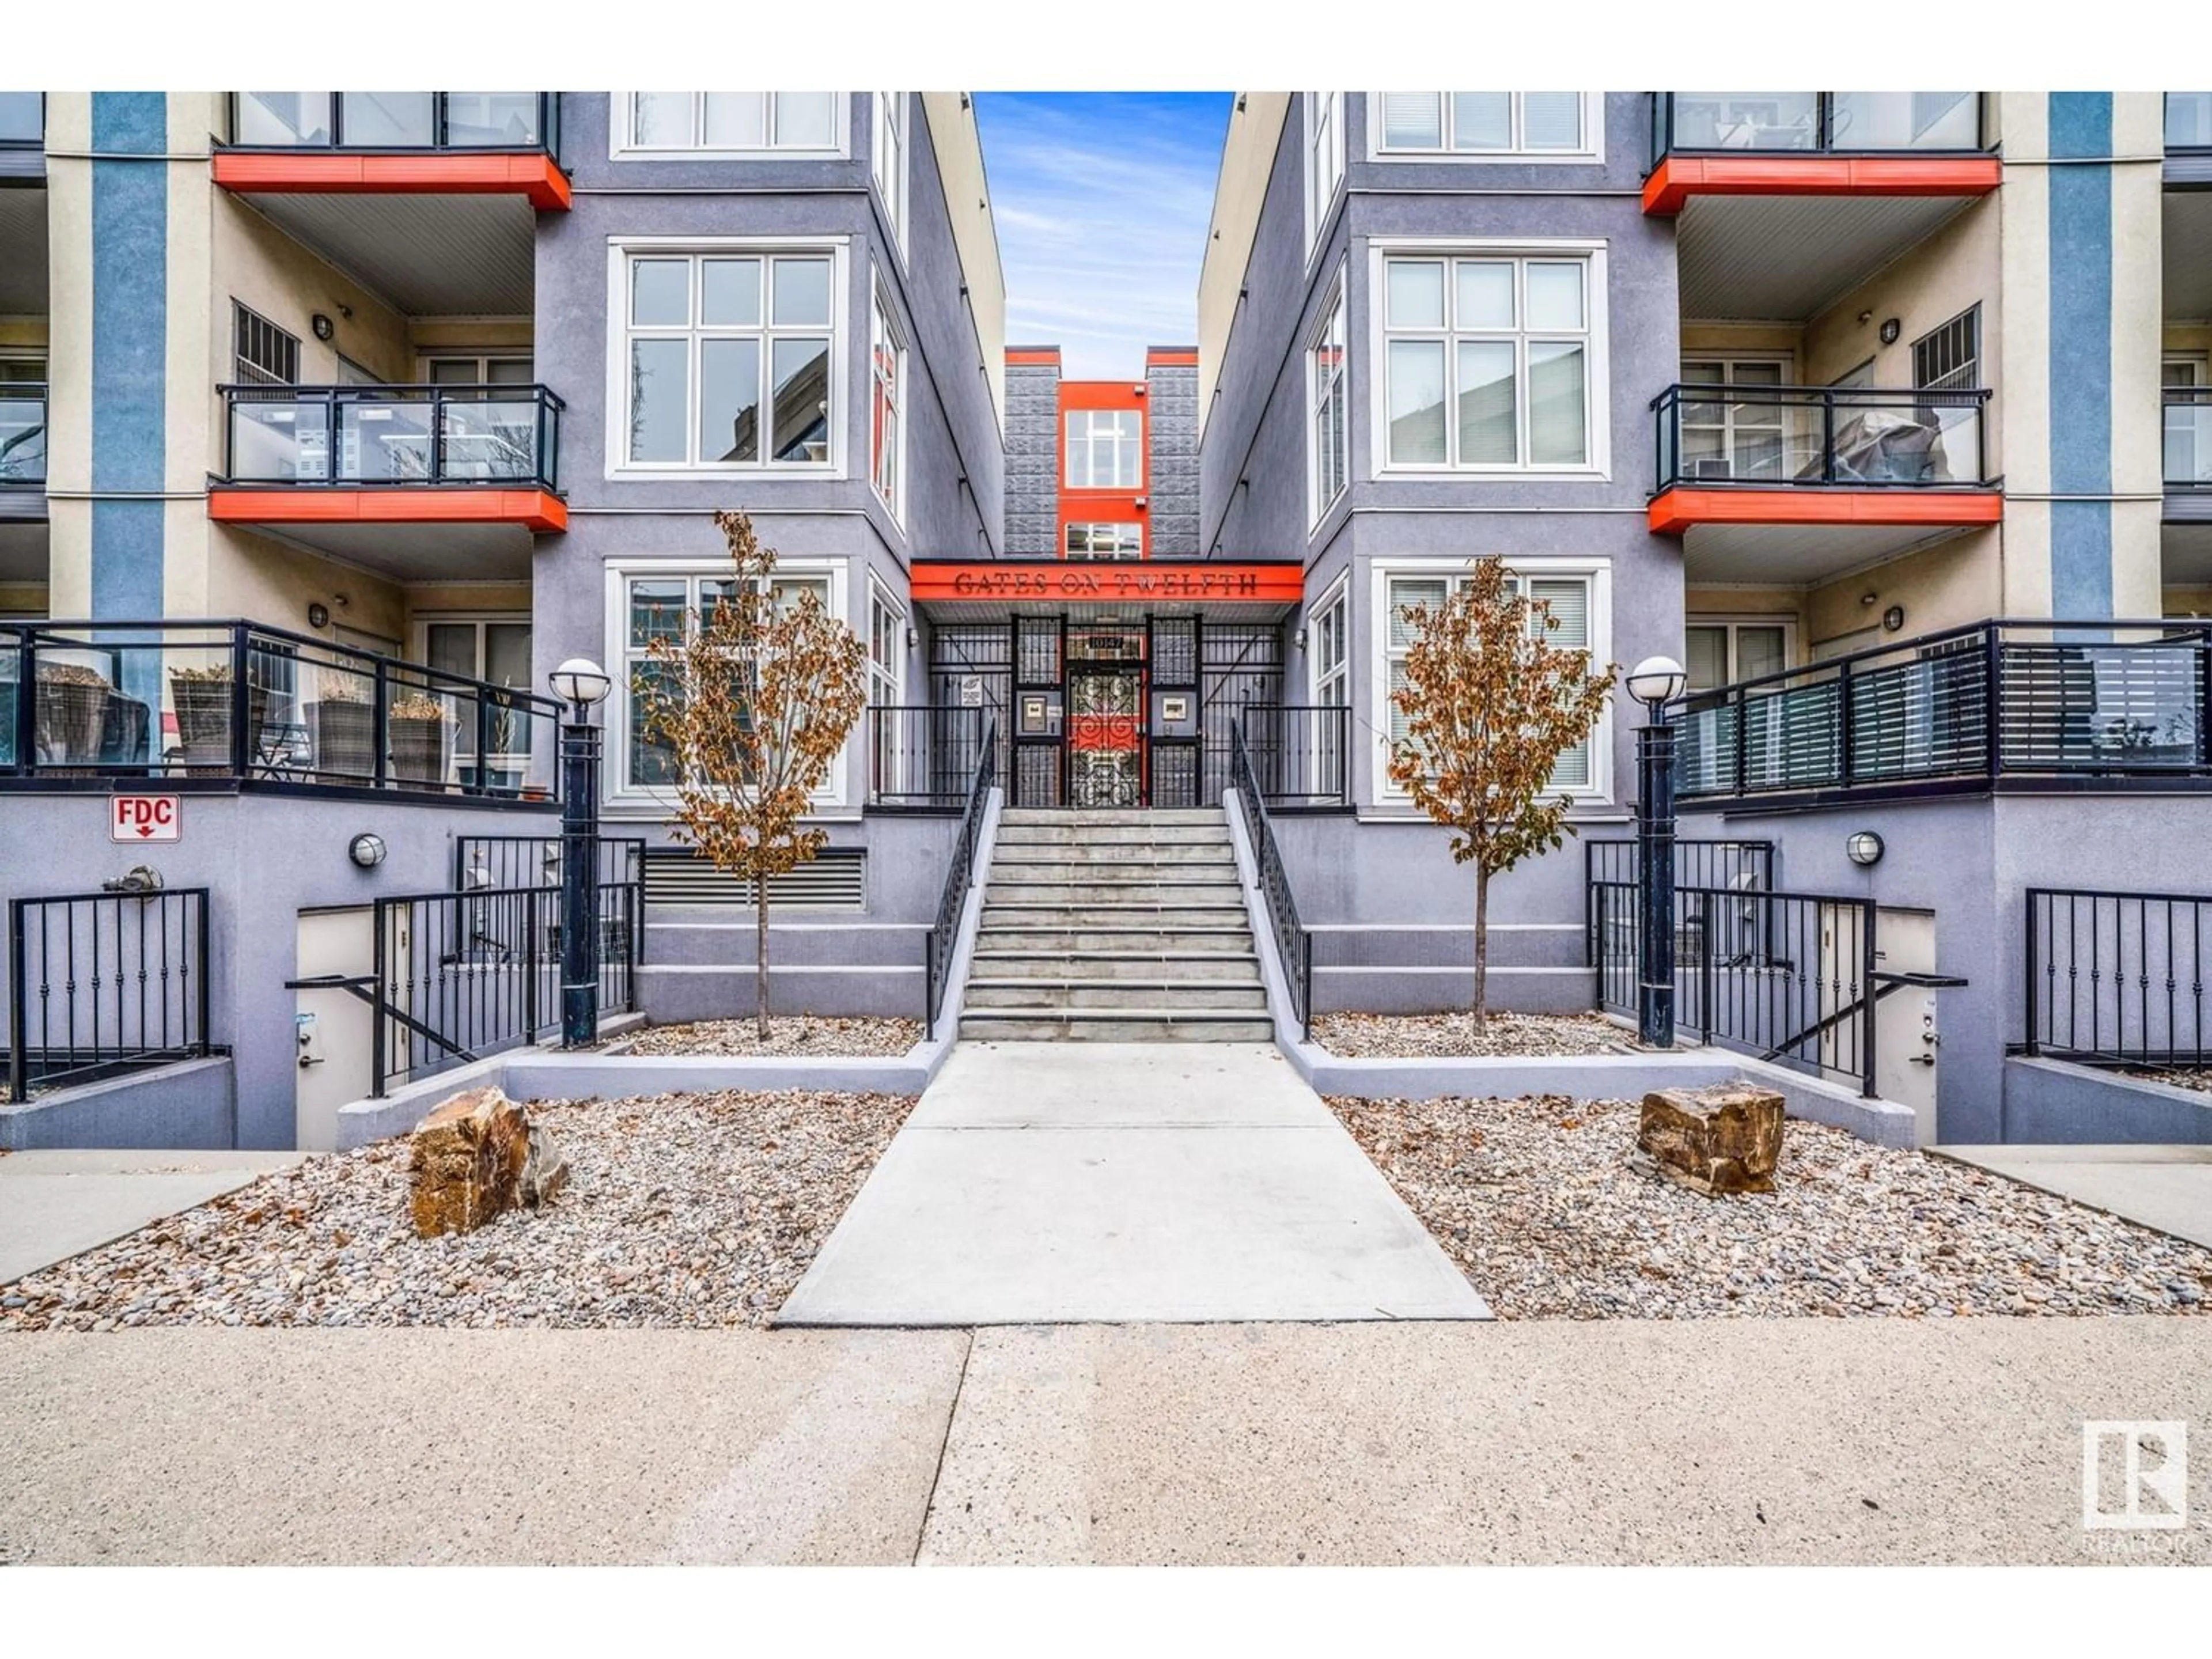 A pic from exterior of the house or condo for #410 10147 112 ST NW, Edmonton Alberta T5K1M1